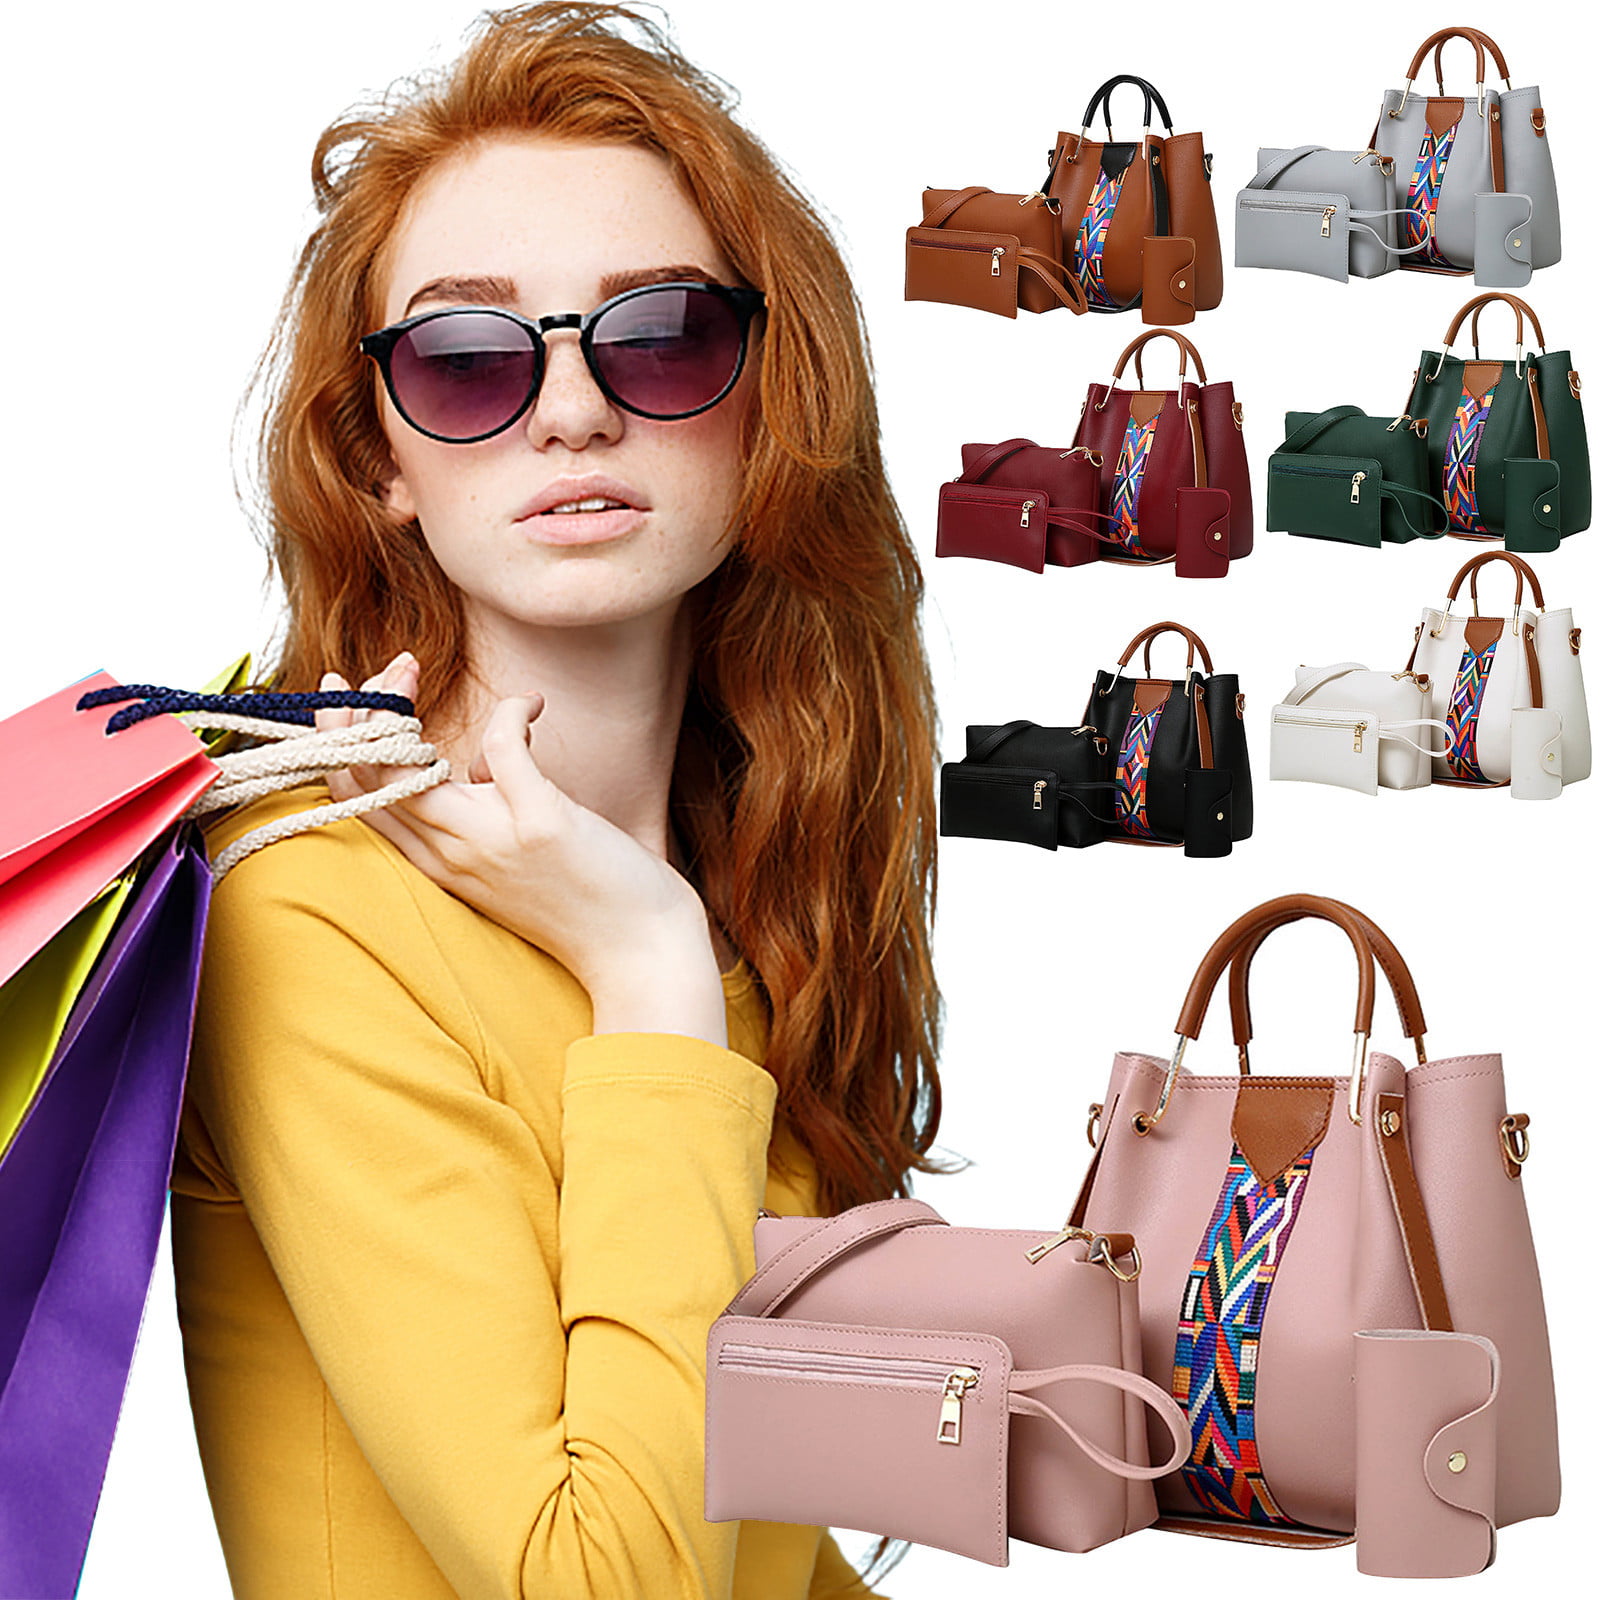 Bags : the different types of bags and how to wear them